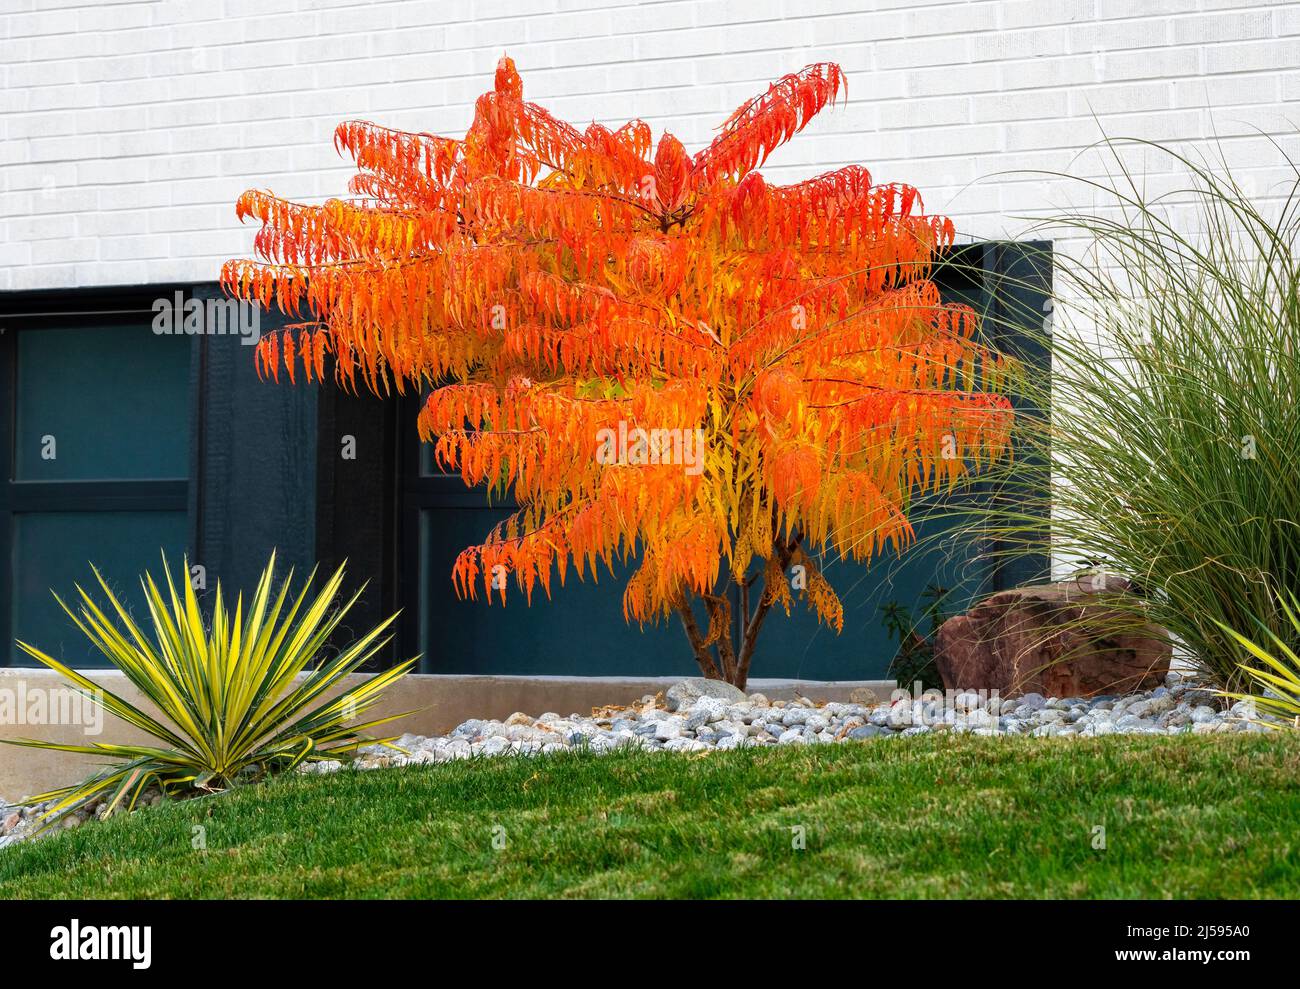 A Sumac tree, Rhus typhina Tiger Eyes, vibrantly orange in the Fall Season, is a beautiful addition in a well landscaped drought resistant garden. Stock Photo